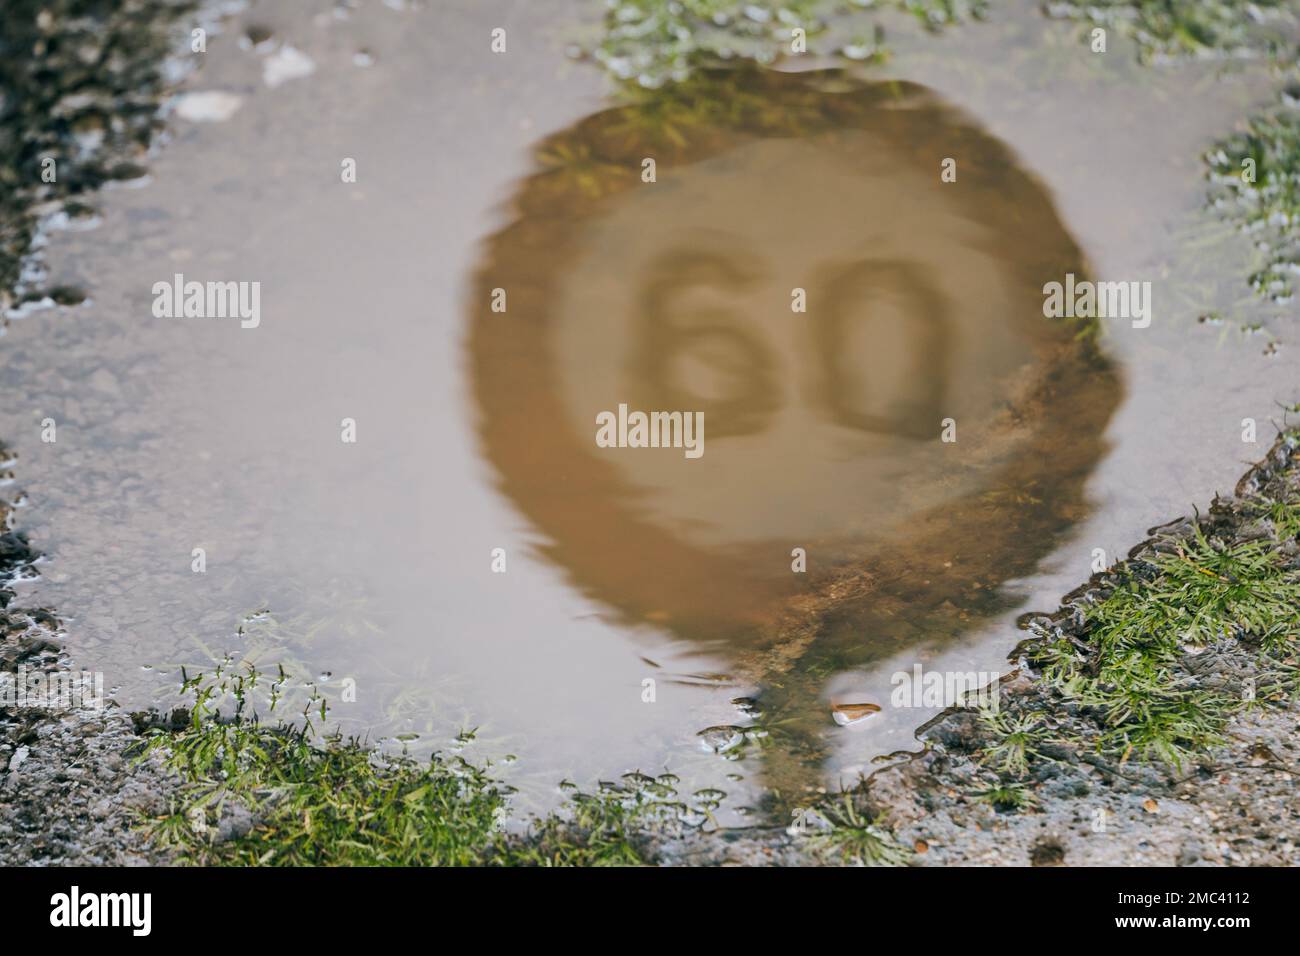 Close up speed limit road sign on an urban street reflected in a puddle of water. Stock Photo